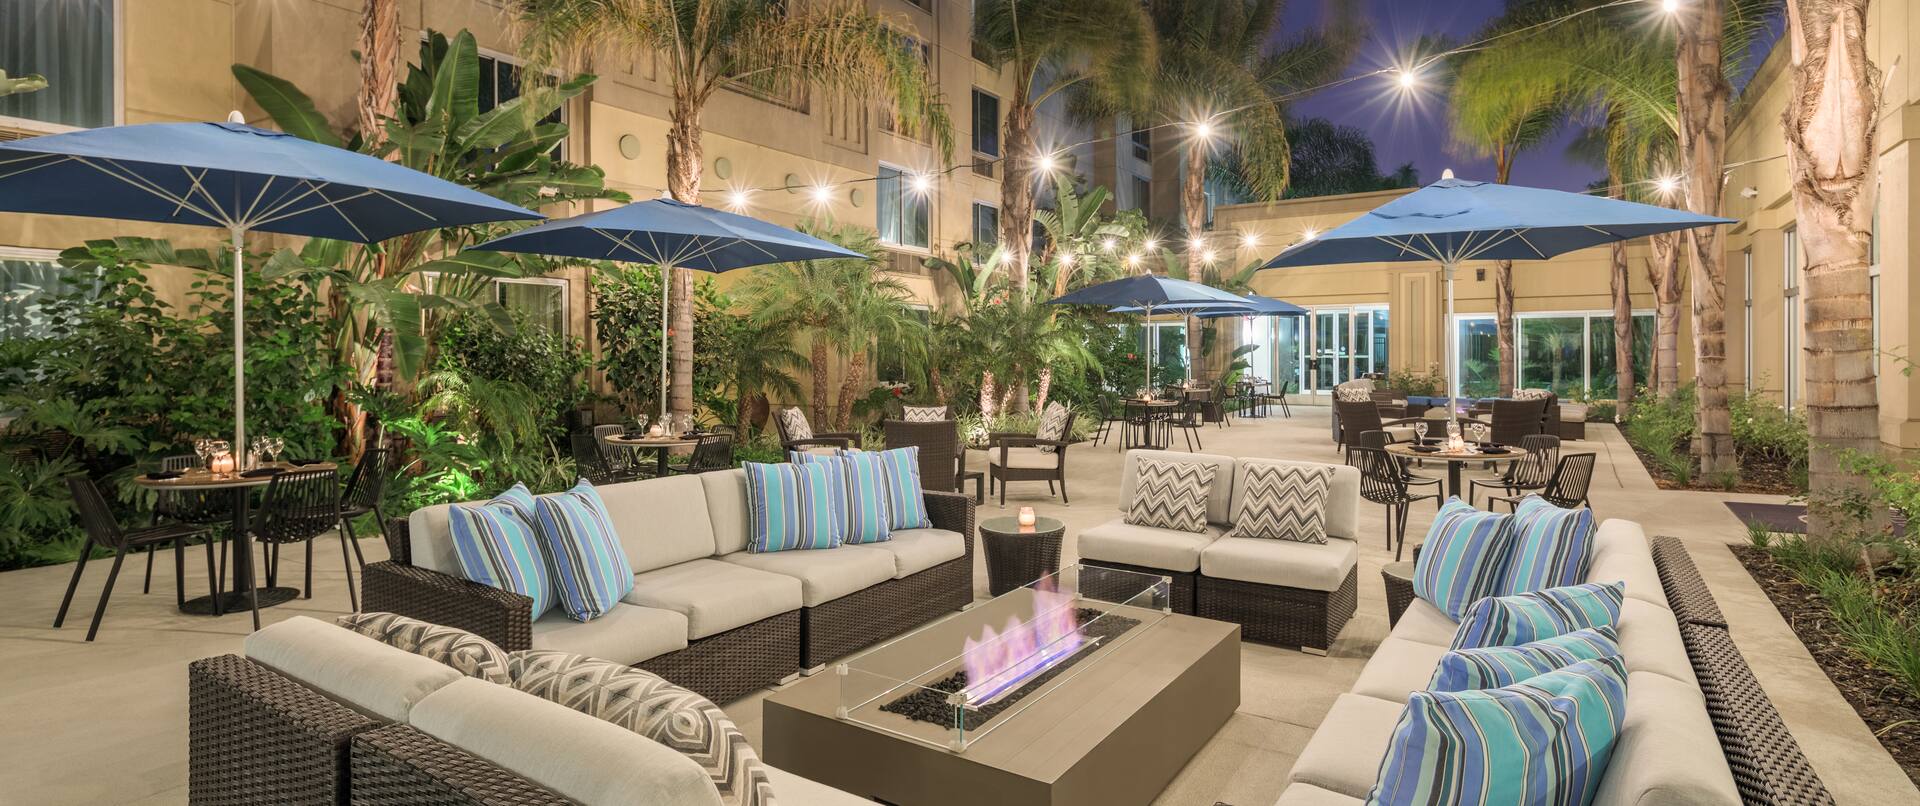 Exterior Courtyard seating area at night with dining tables, chairs, table umbrellas, lounge sofas, and palm trees